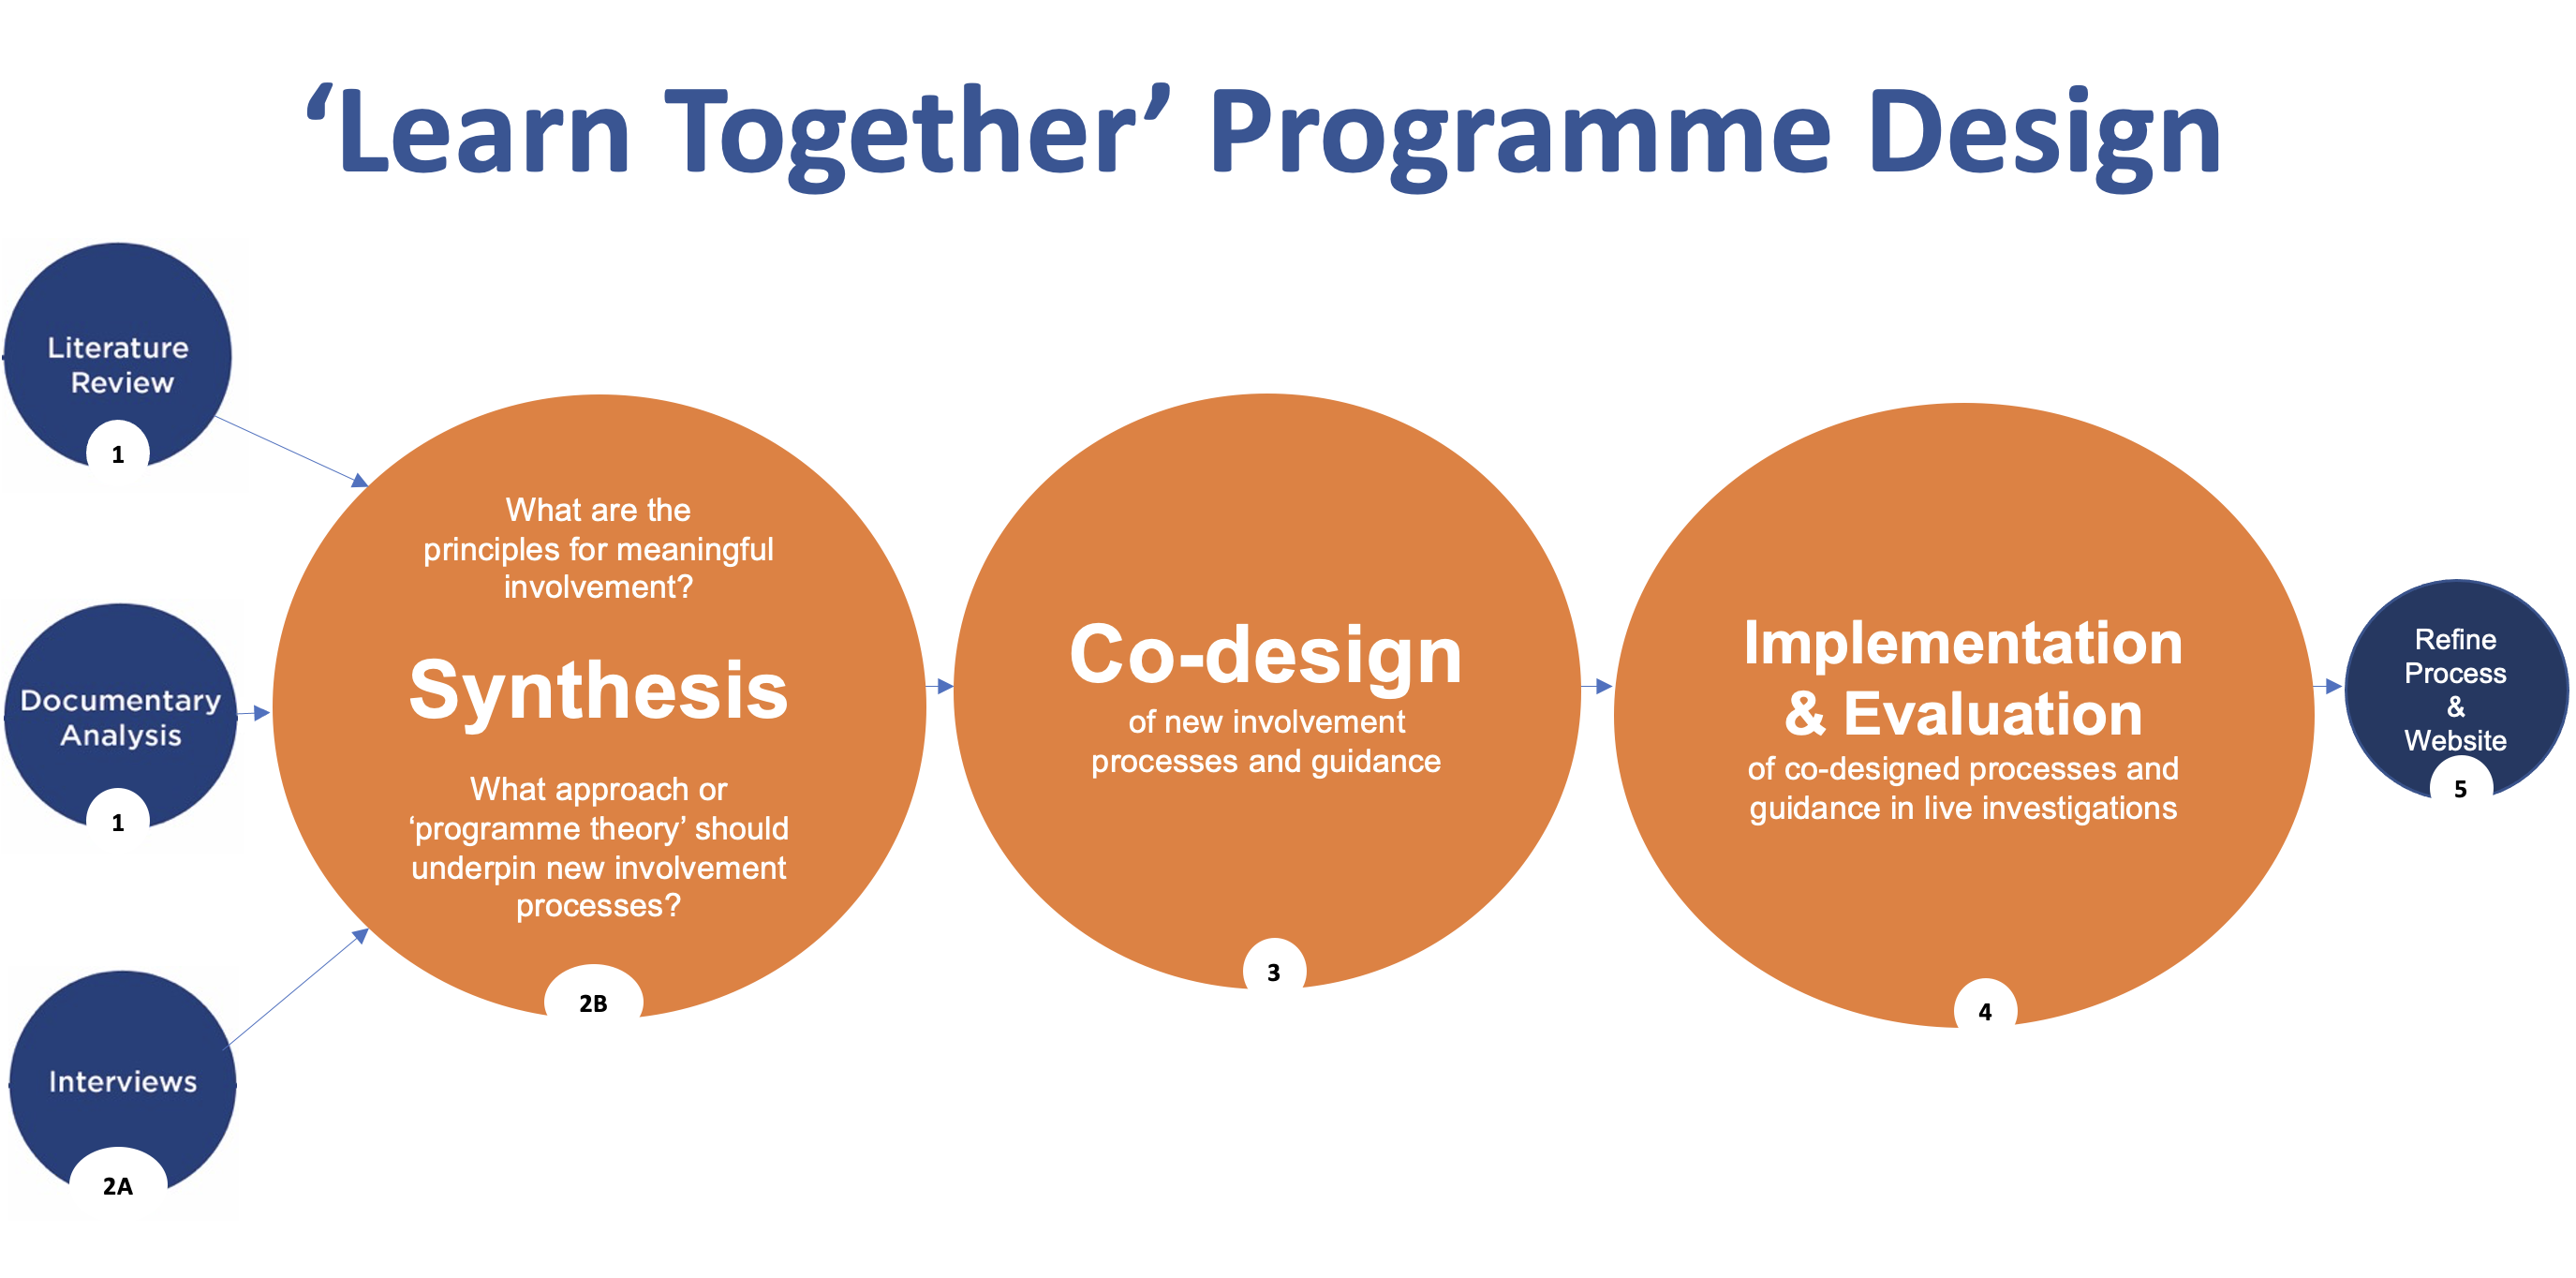 Chart showing the Learn Together programme design